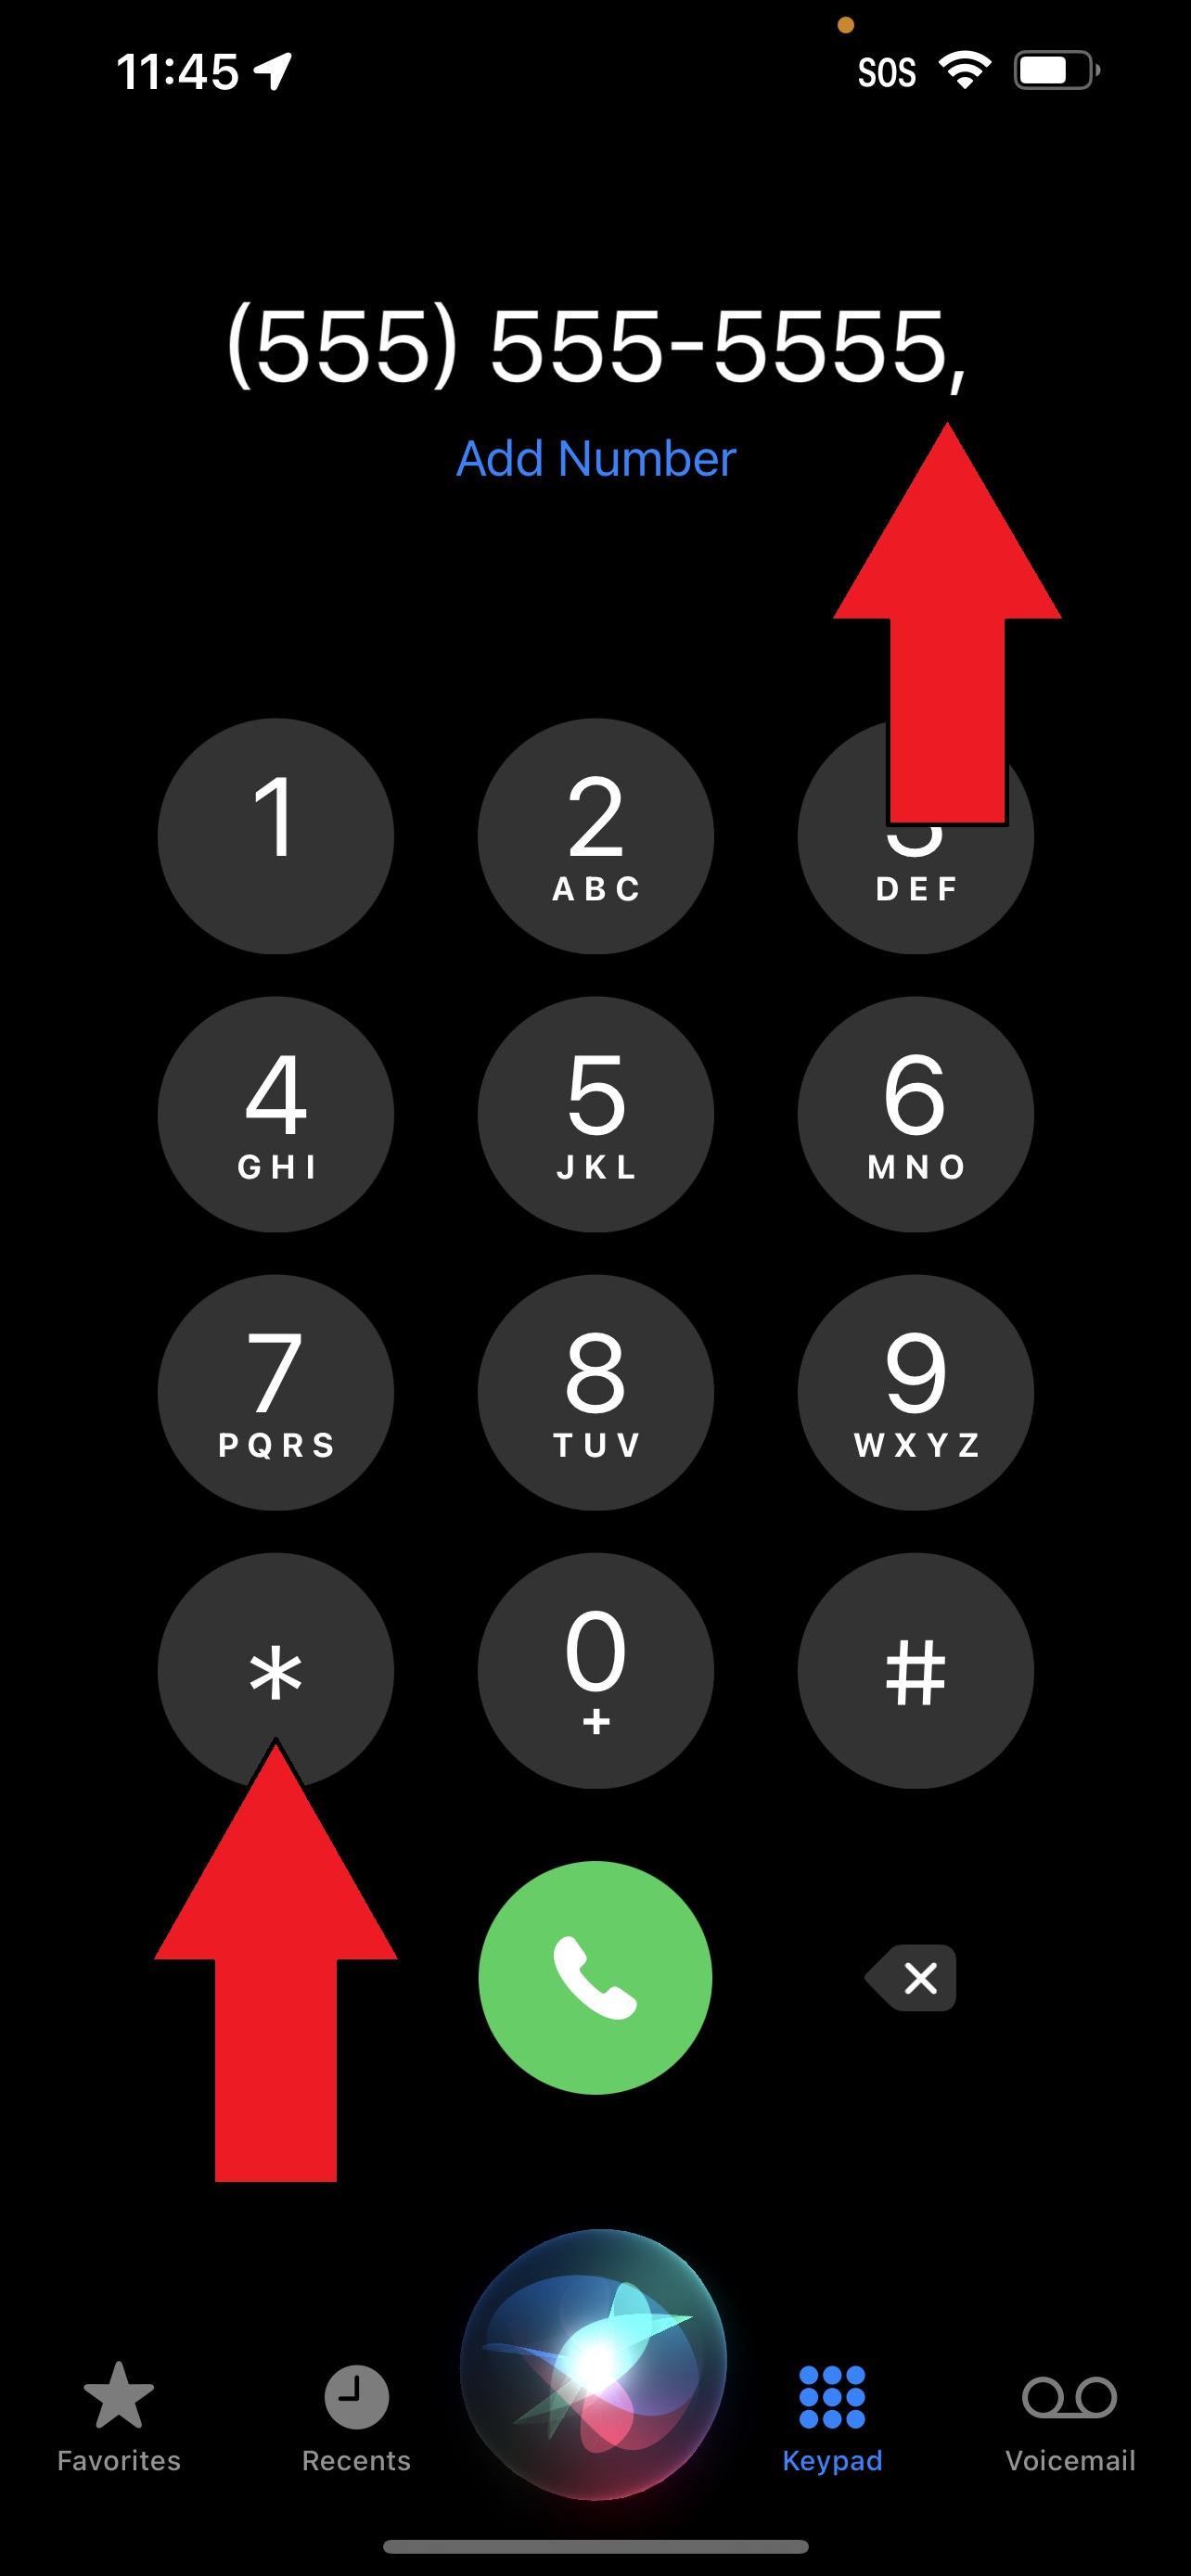 How to dial an extension on iPhone